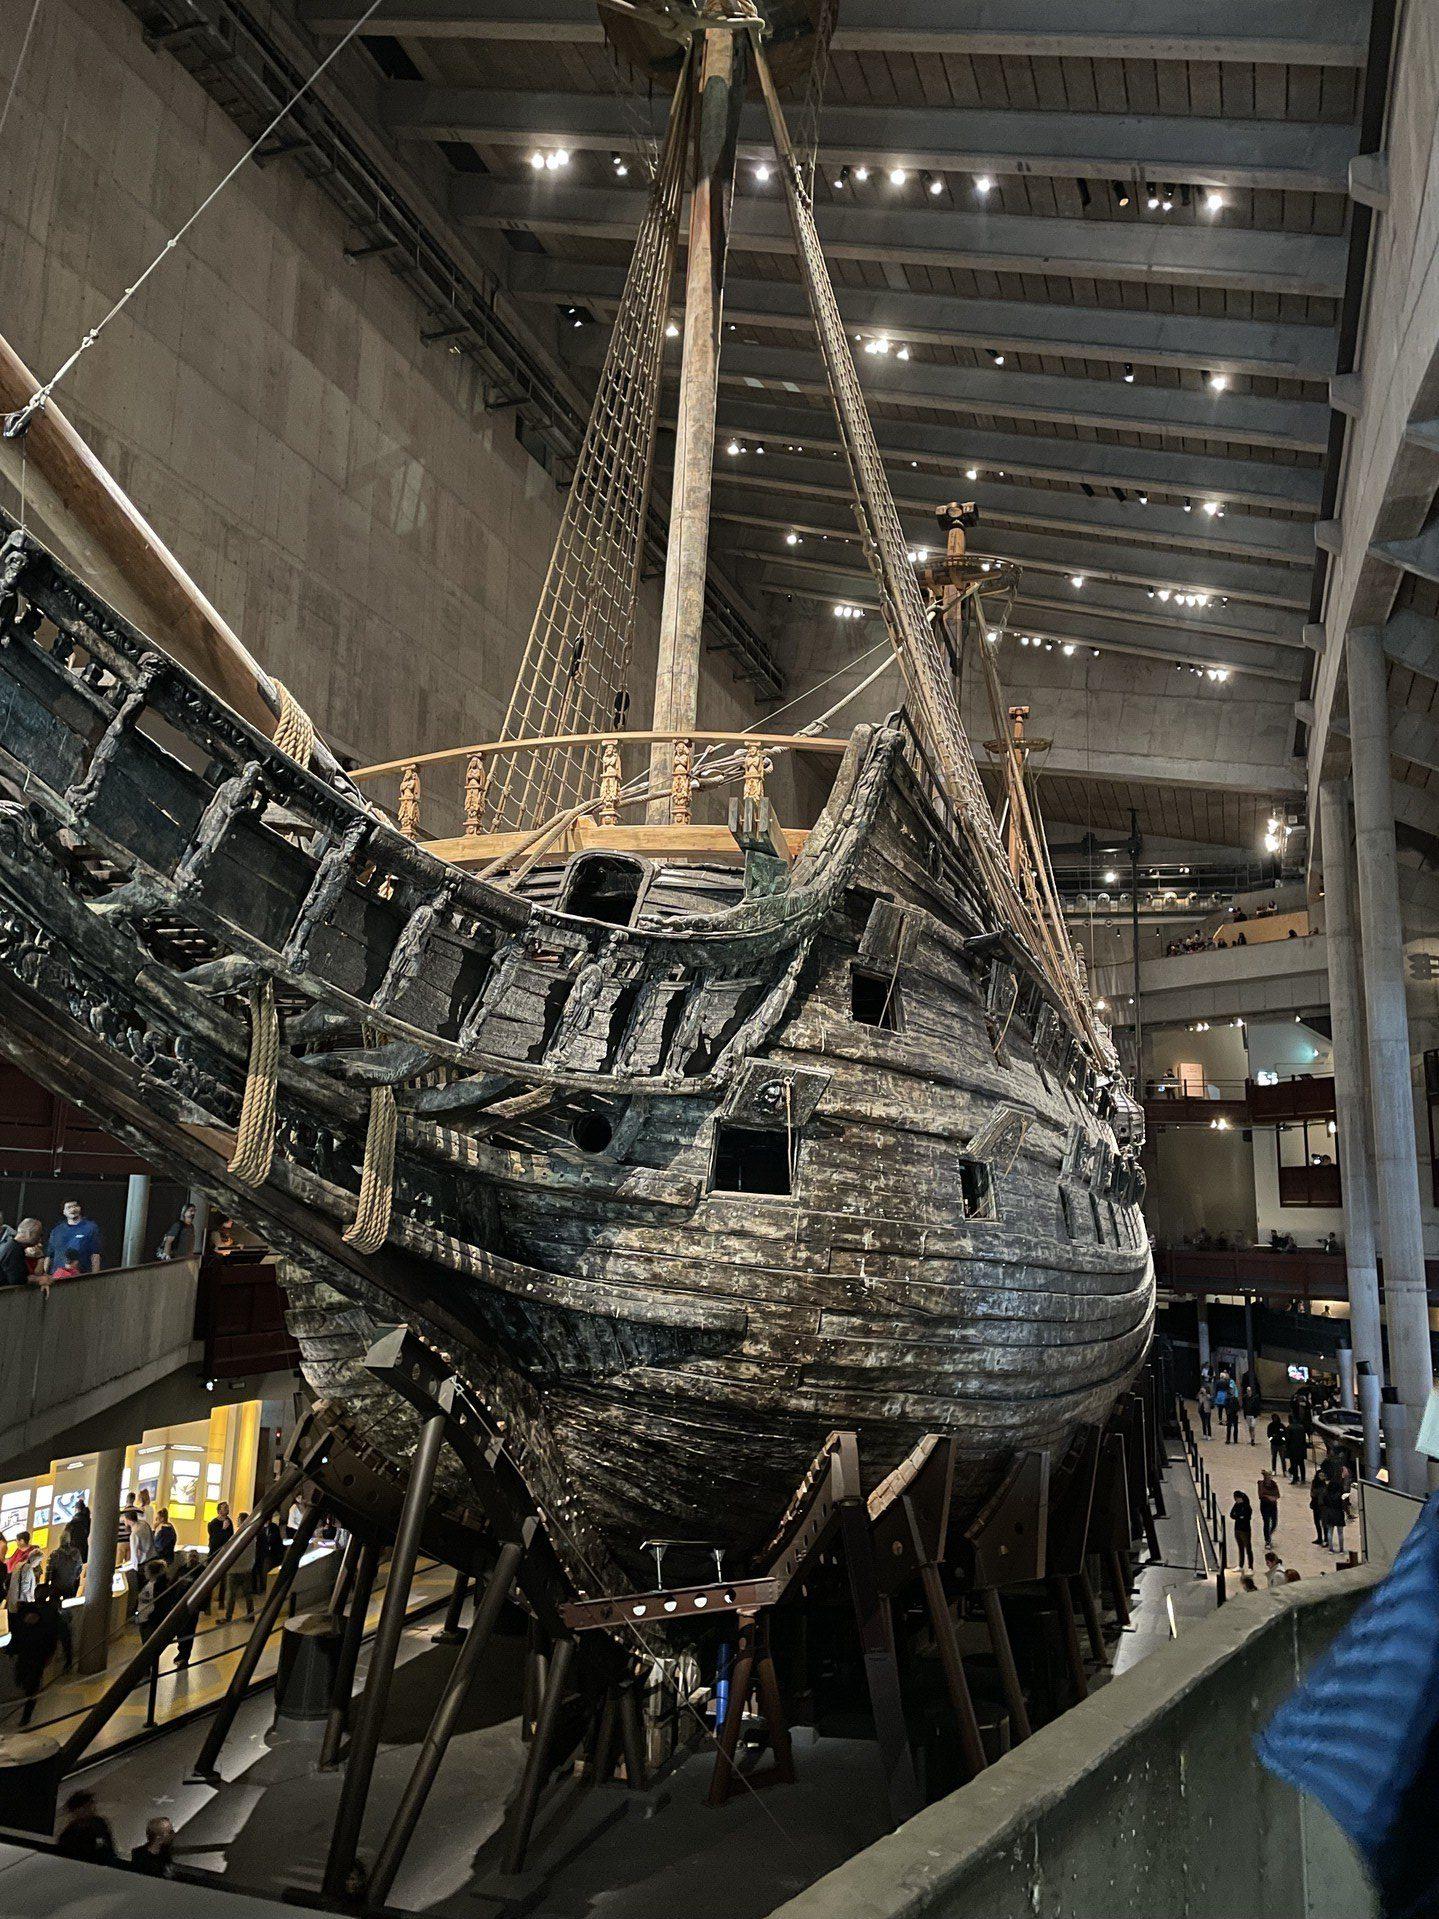 Vasa from fore-port, looking towards the back of the ship